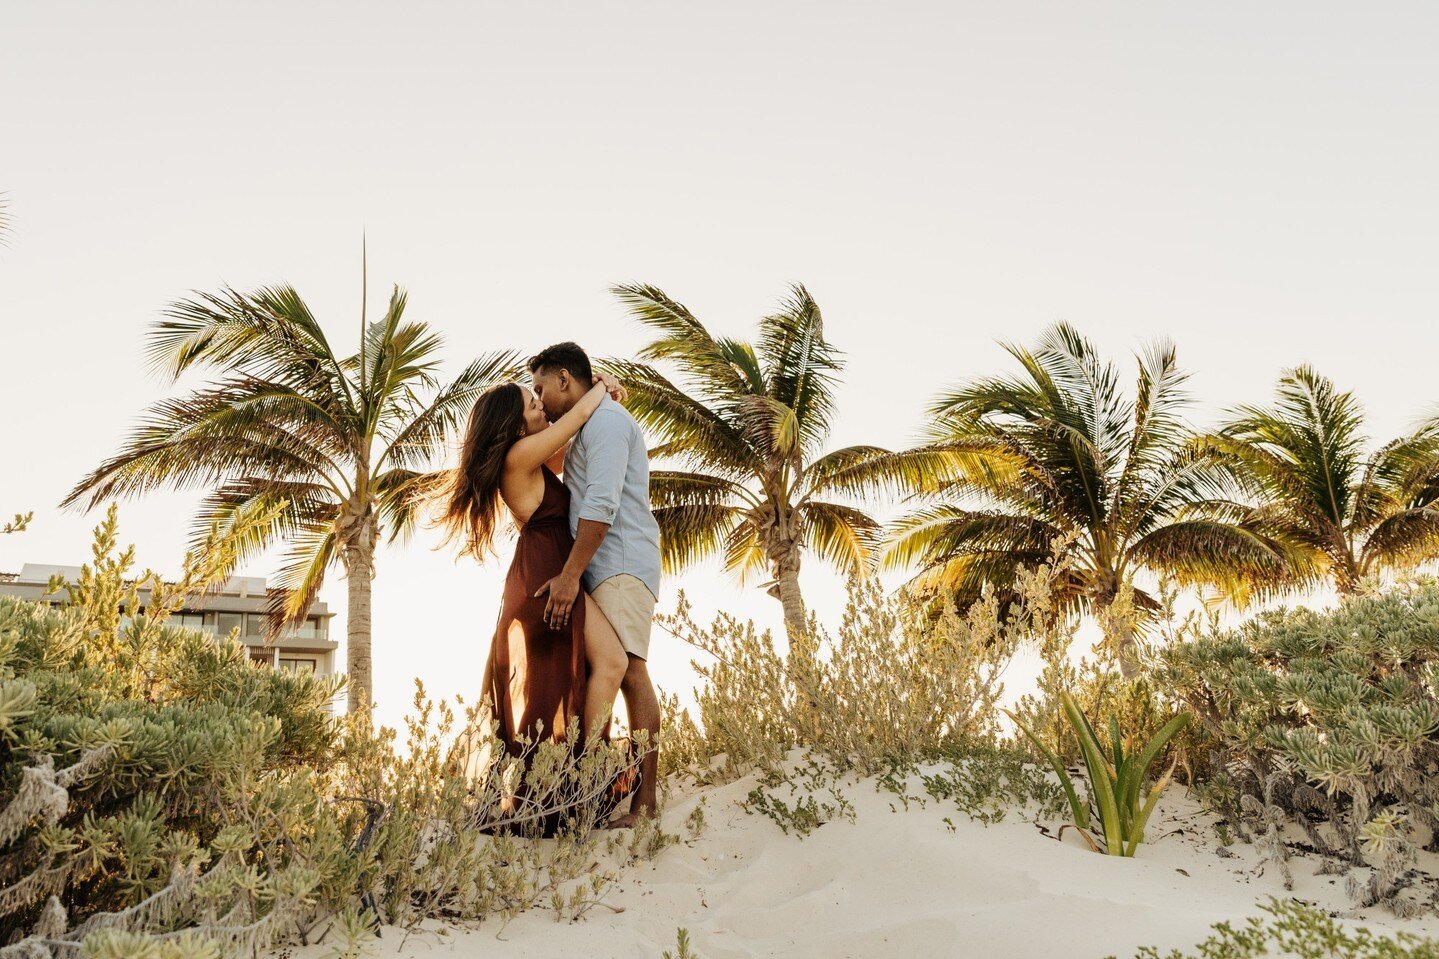 I was traveling to Cancun to cover a 40th birthday party and was asked to do an engagement session for the birthday boy's brother. 
The most beautiful part of the trip was that walking around Cancun brought back thousands of memories of the 5 years I